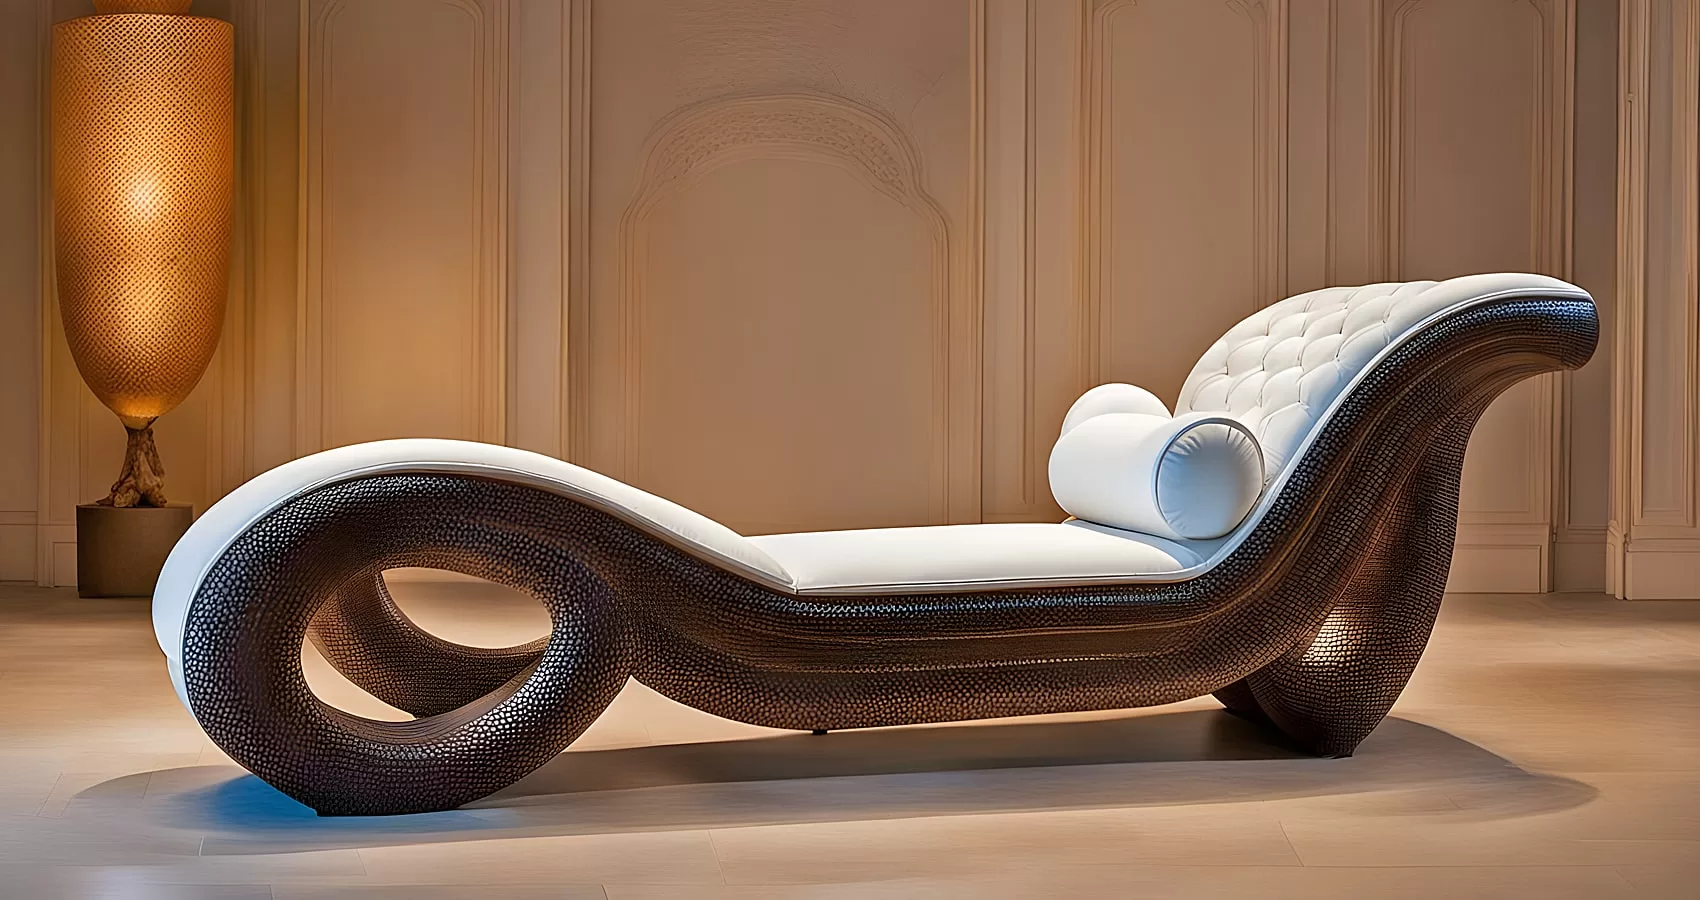 Tantric Chaise Lounge